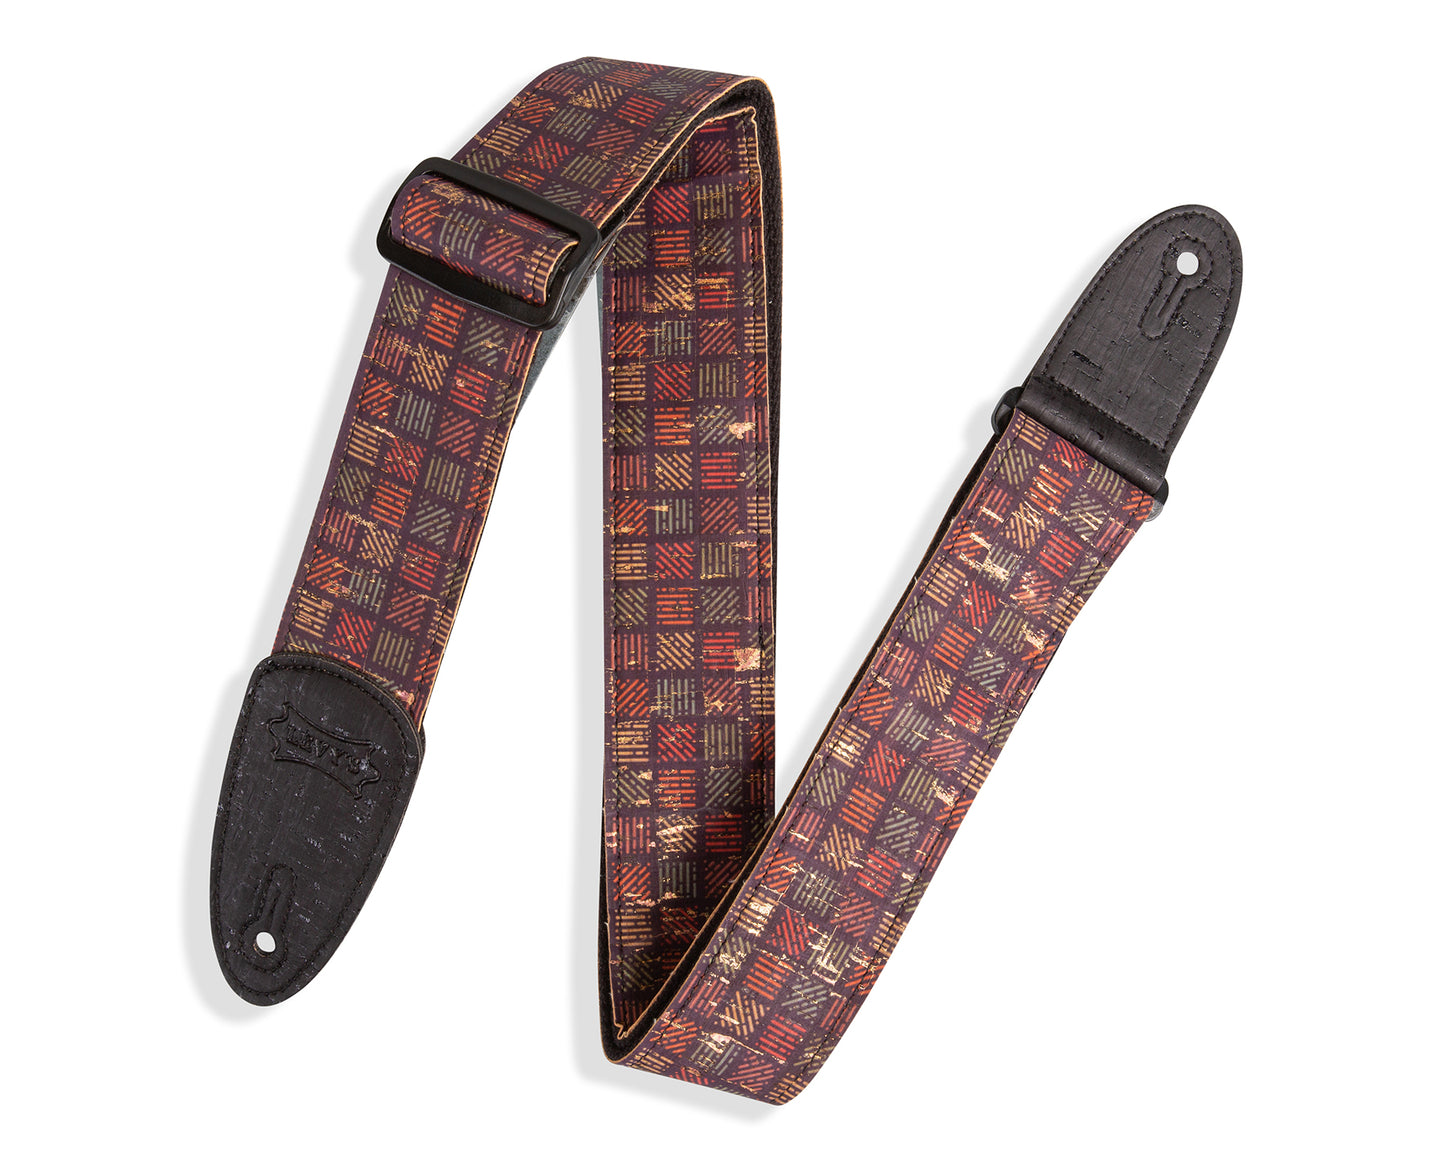 Levy's Leathers - MX8-004 - 2 inch Wide Cork Guitar Strap